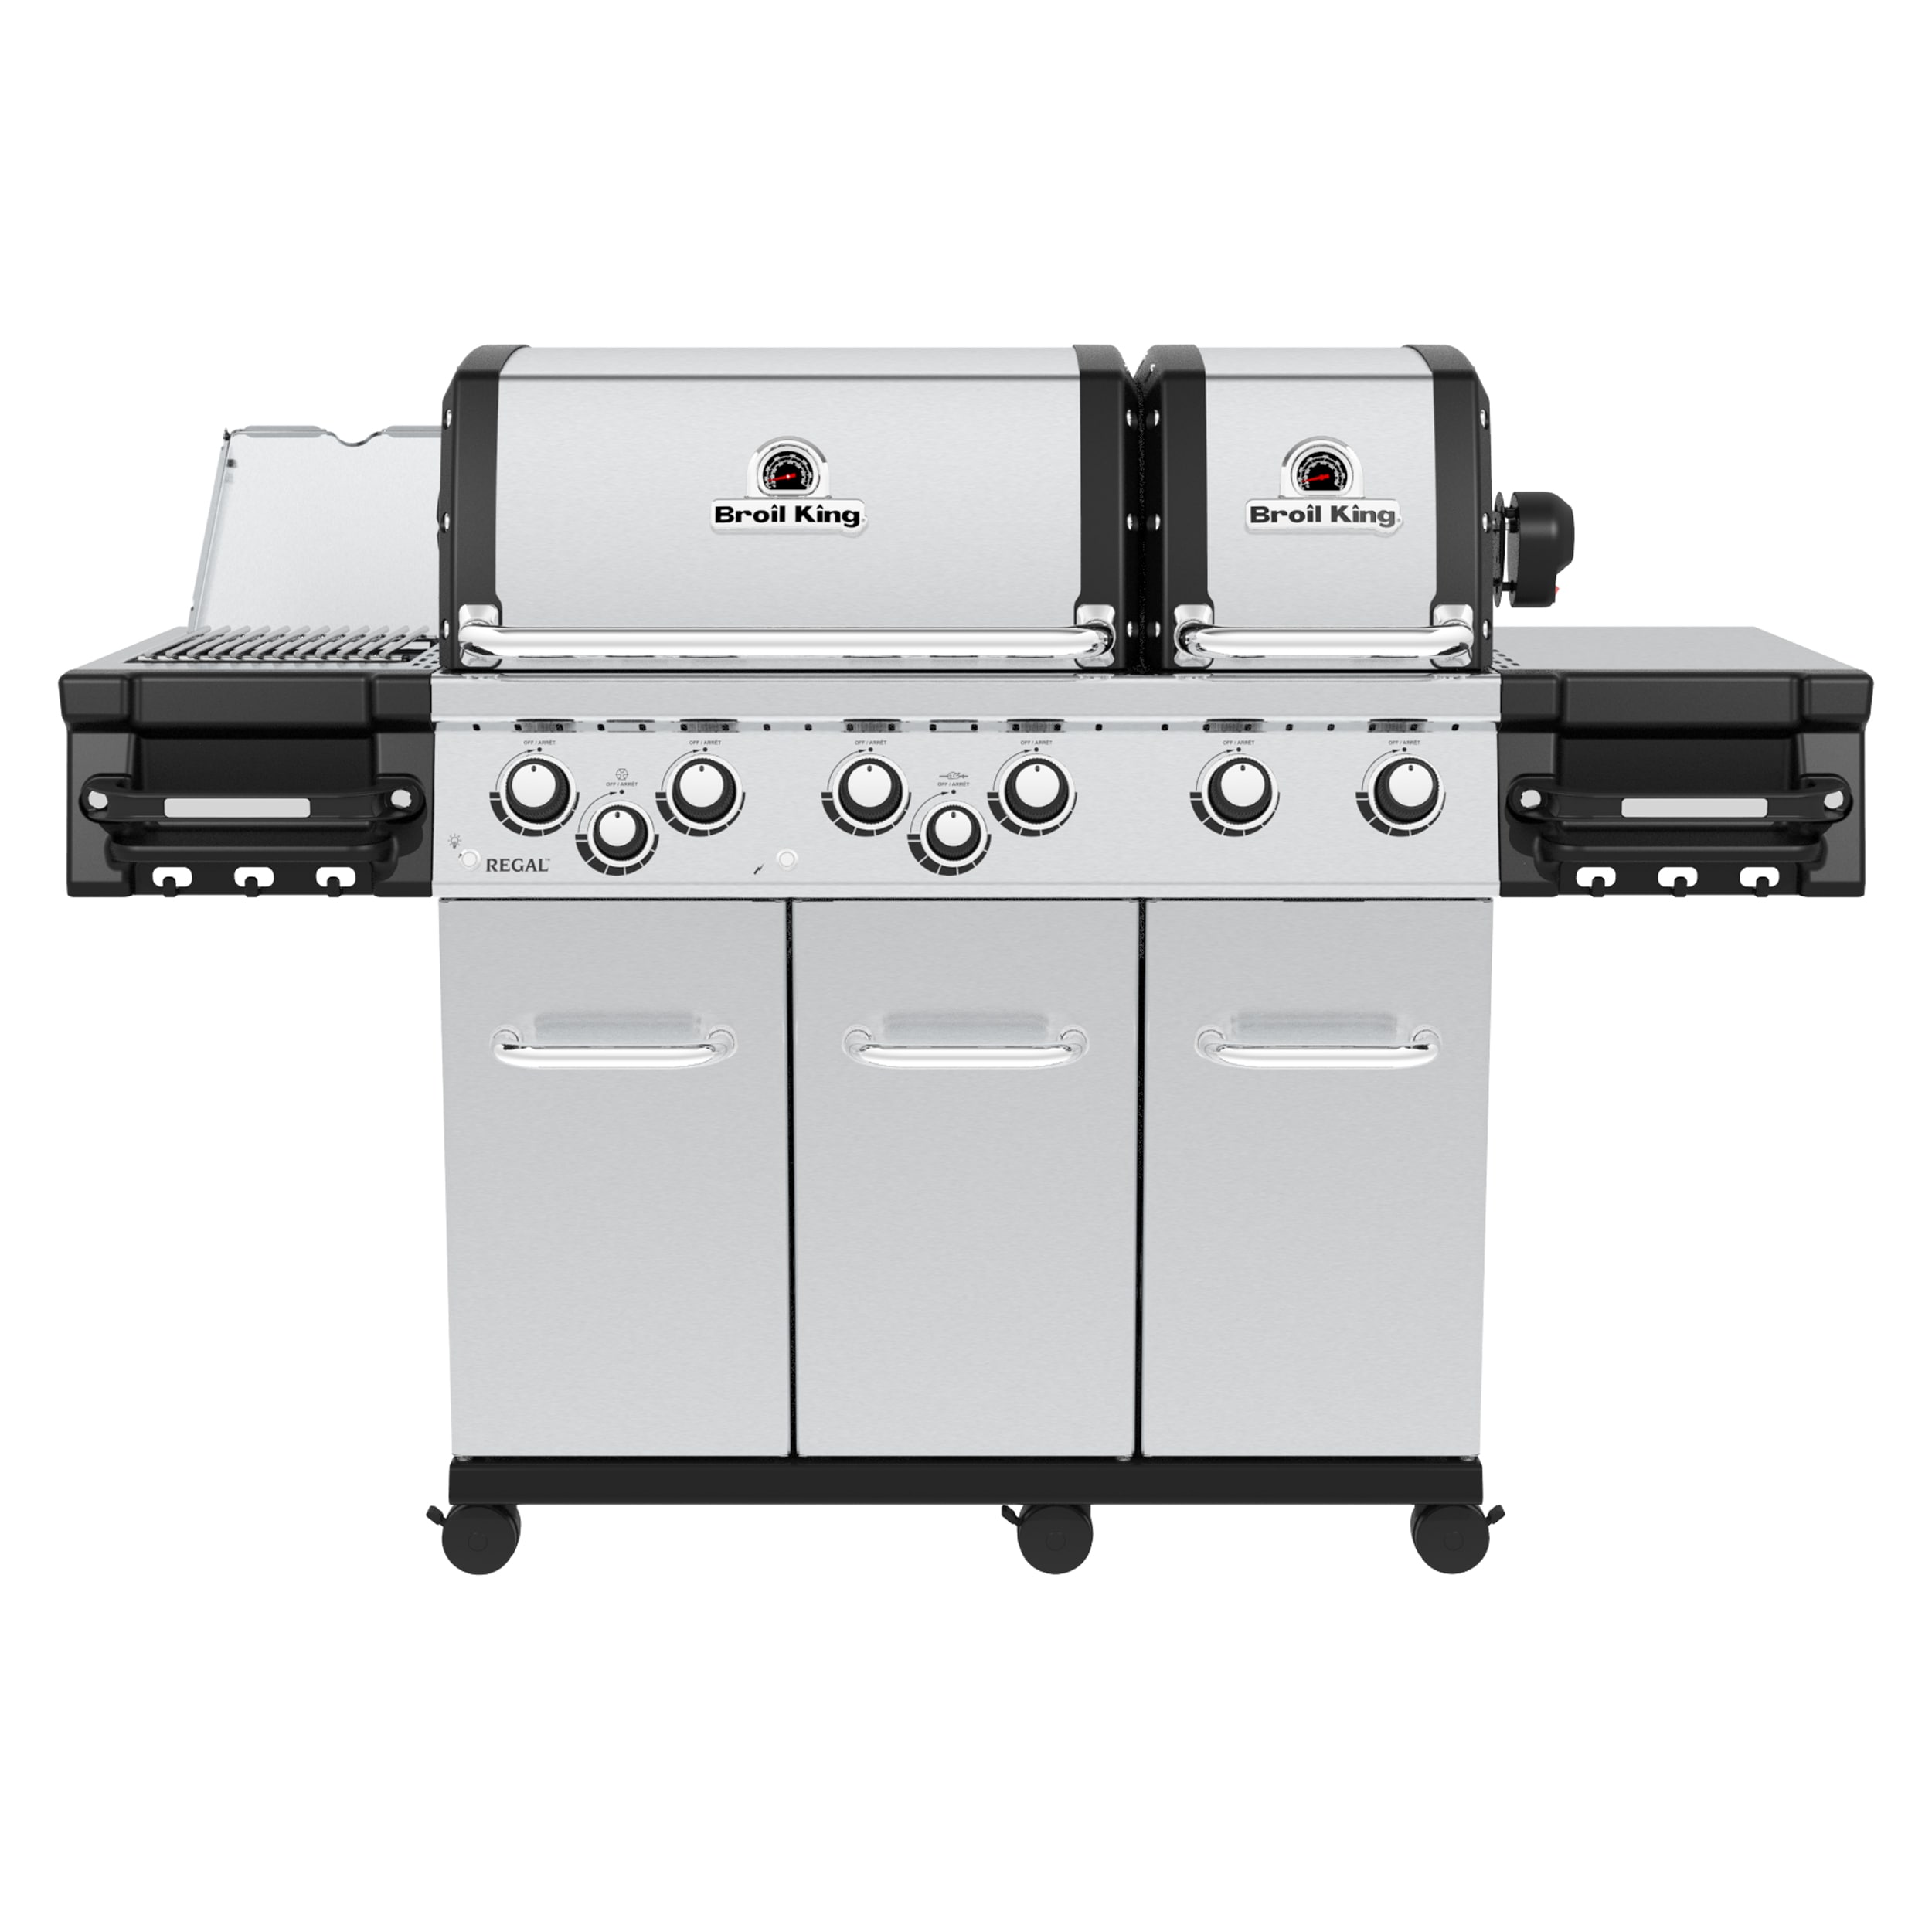 Broil King S 690 Pro IR Stainless Steel 6-Burner Gas Infrared Gas Grill with 1 Side Burner with Rotisserie Burner in the Gas Grills department at Lowes.com